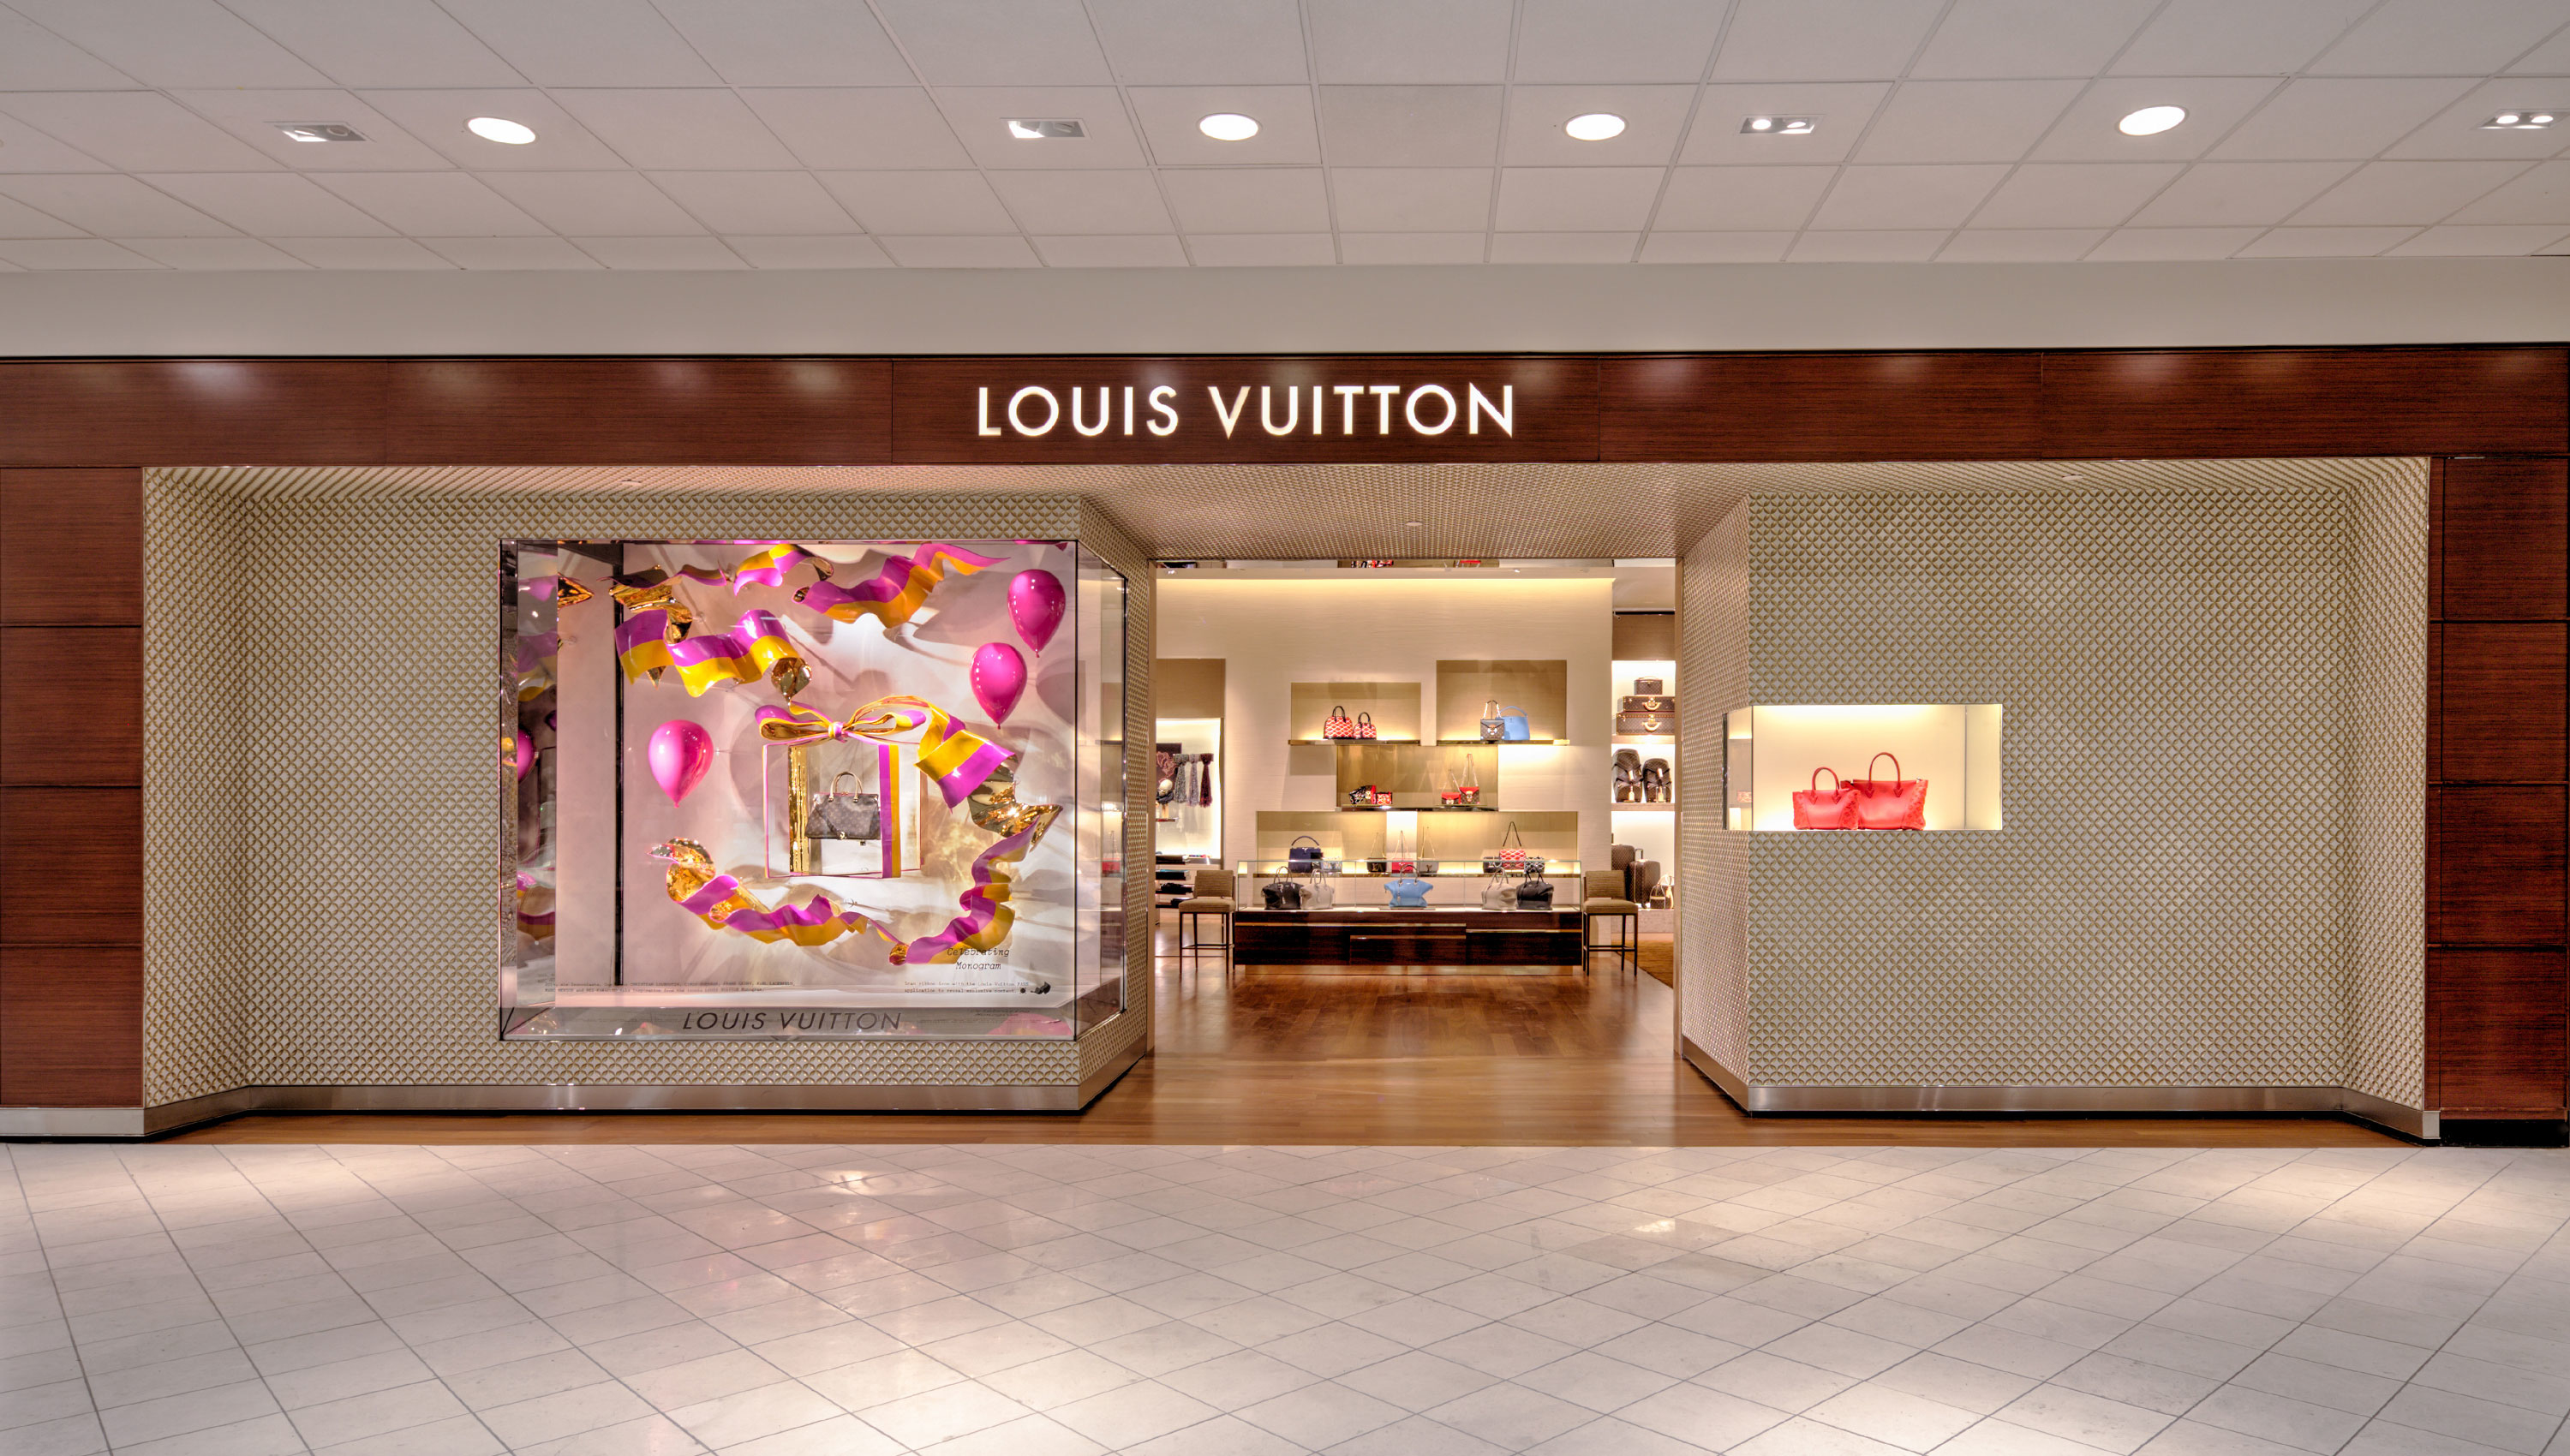 Louis Vuitton Indianapolis Saks Coupons Indianapolis IN near me | 8coupons